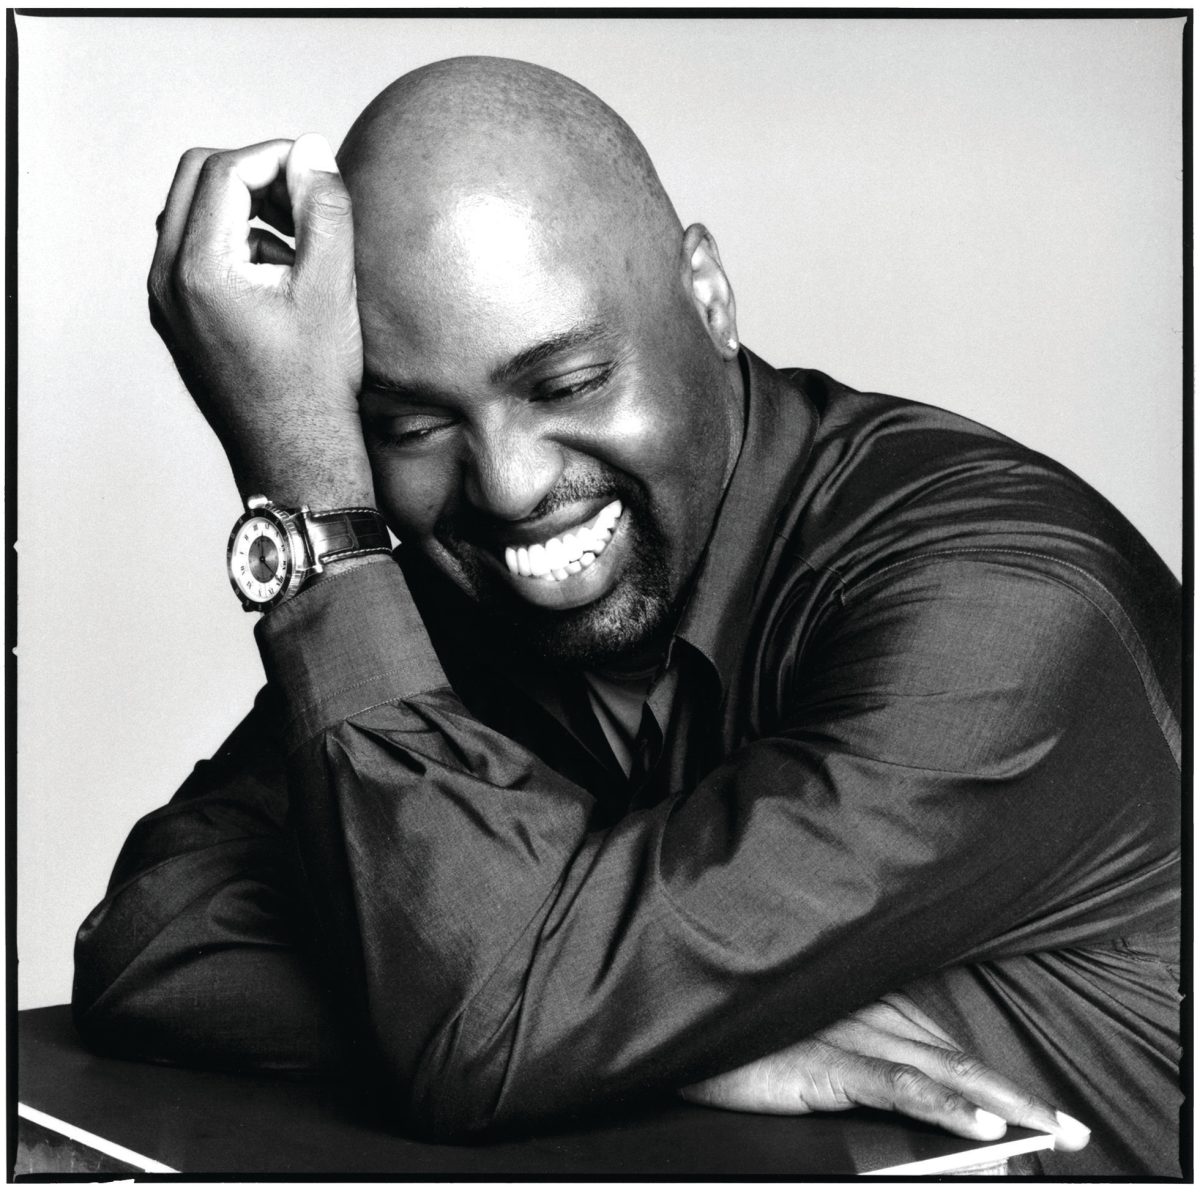 Frankie Knuckles ‘House Masters’ is now available on vinyl